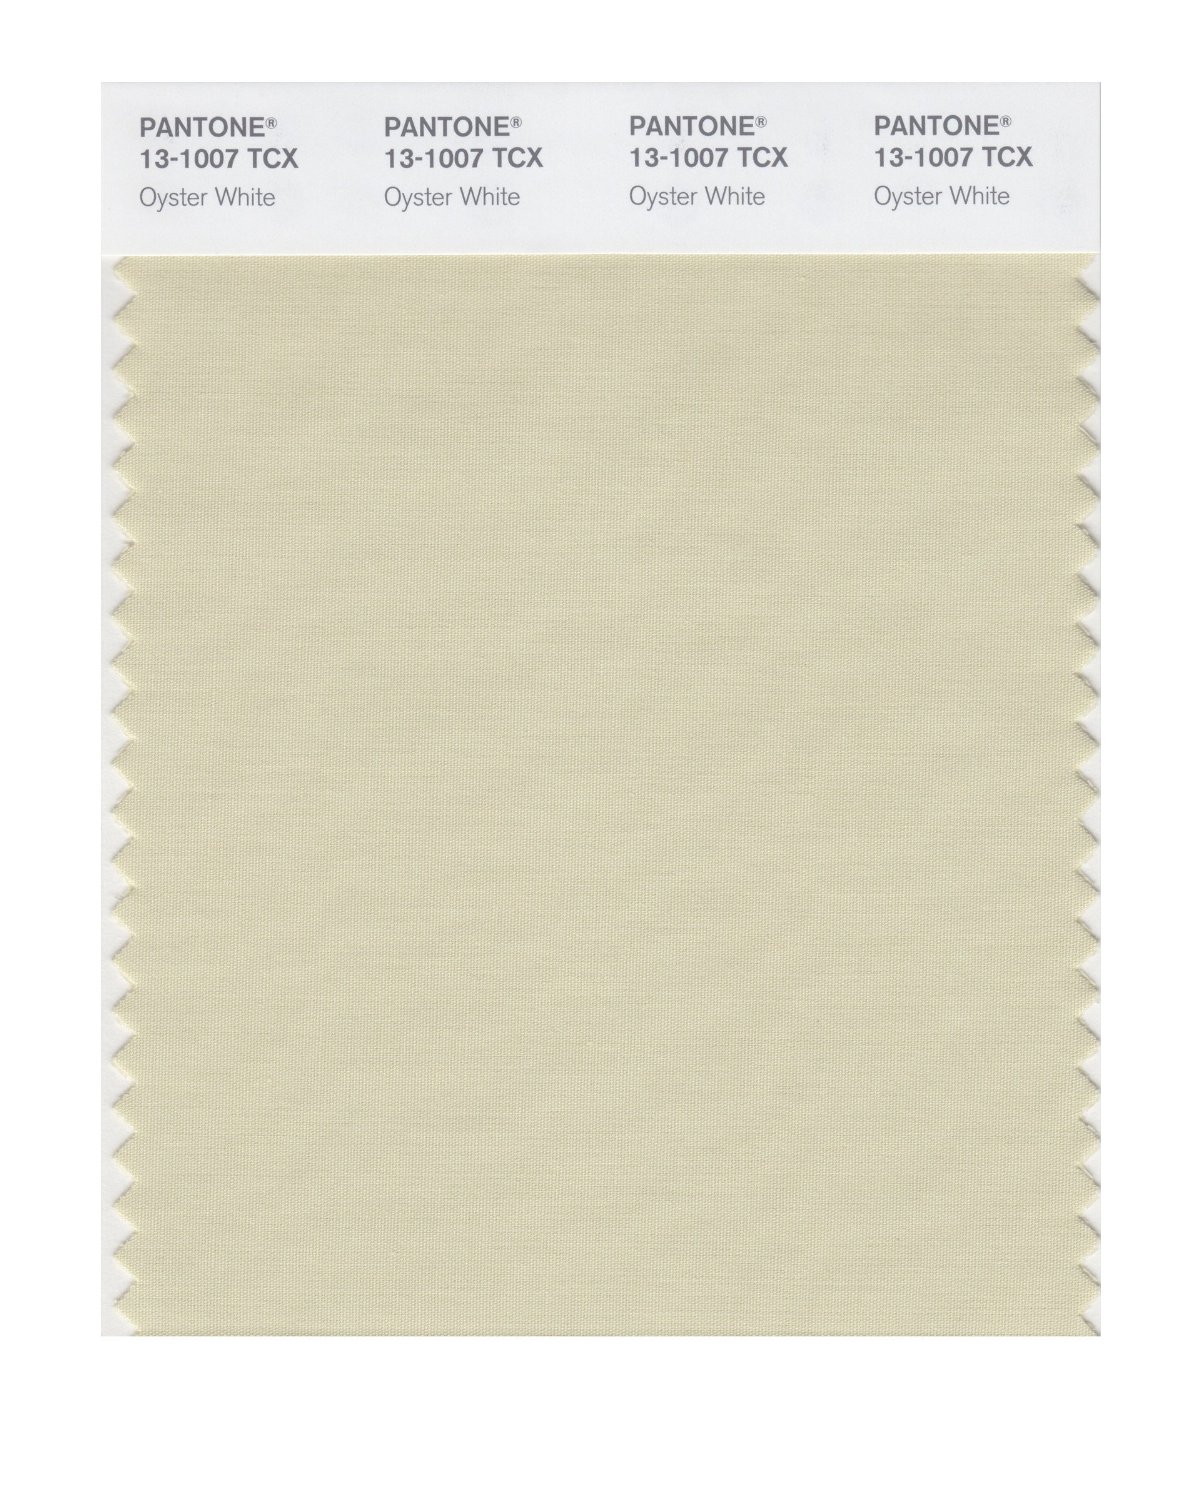 Pantone Cotton Swatch 13-1007 Oyster White